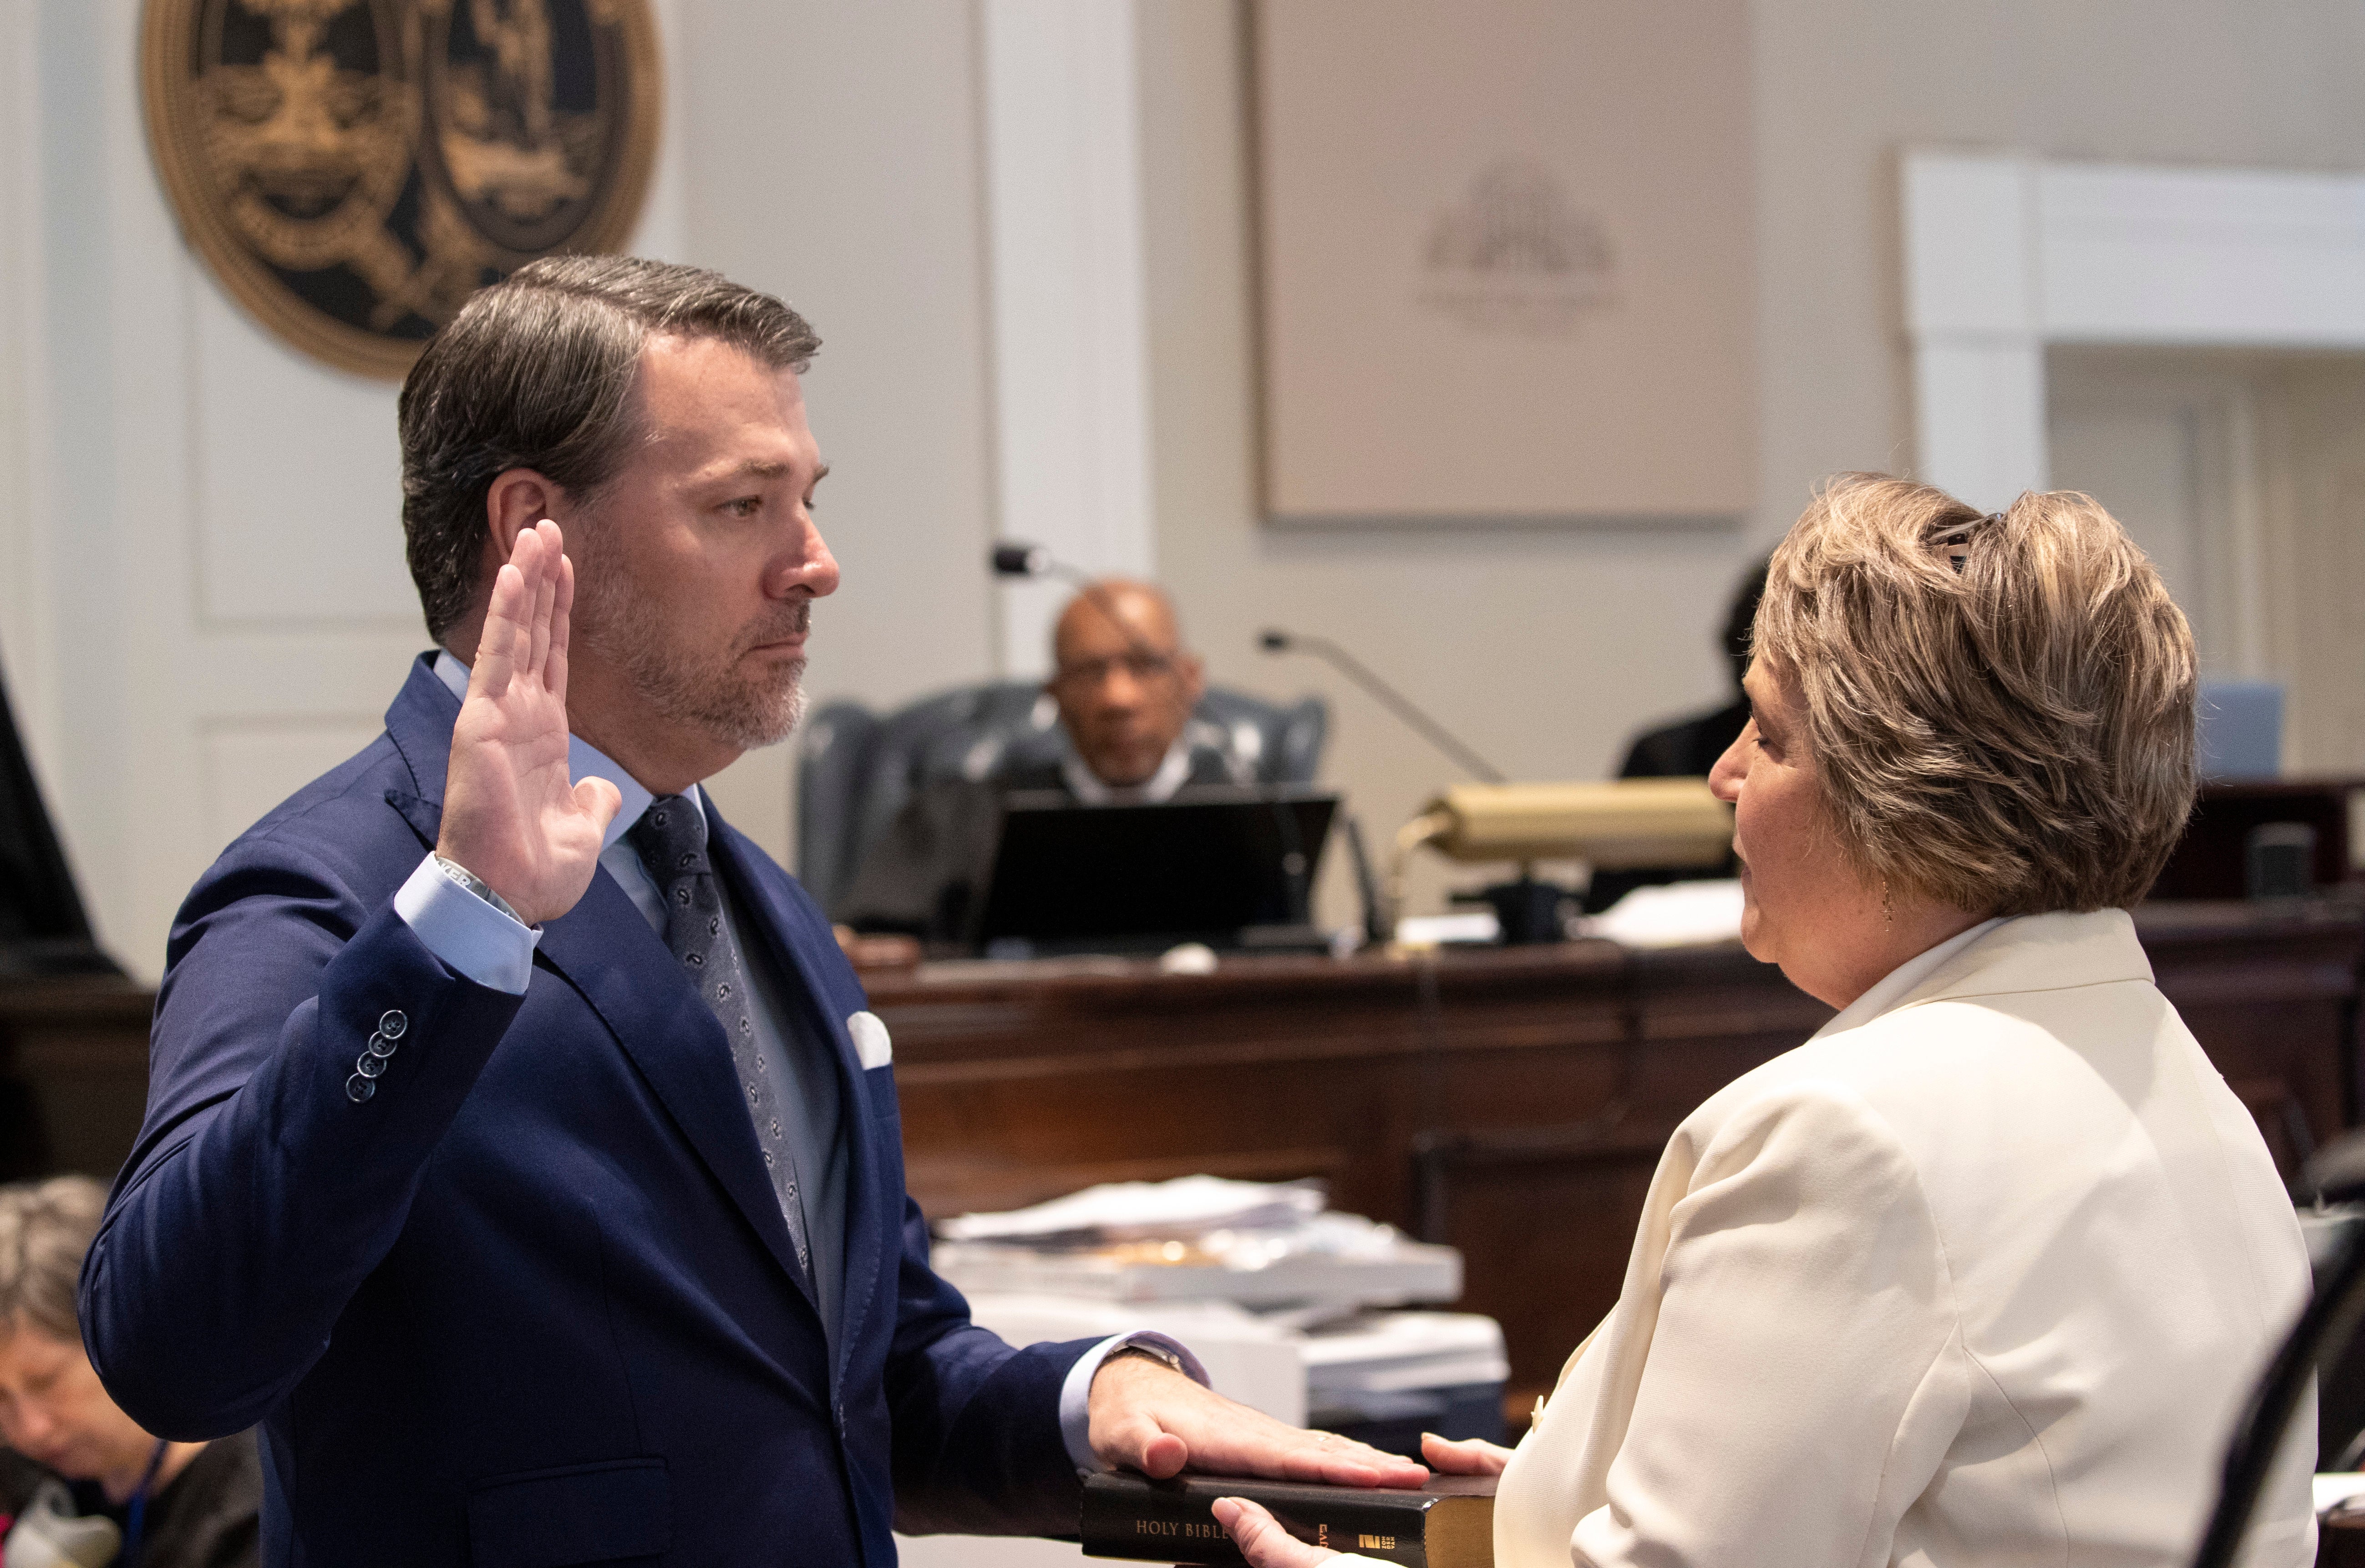 Michael Gunn, principle at Forge Consulting, gives the witness oath by Colleton County Clerk of Court Rebecca Hill, right, during Alex Murdaugh's double murder trial